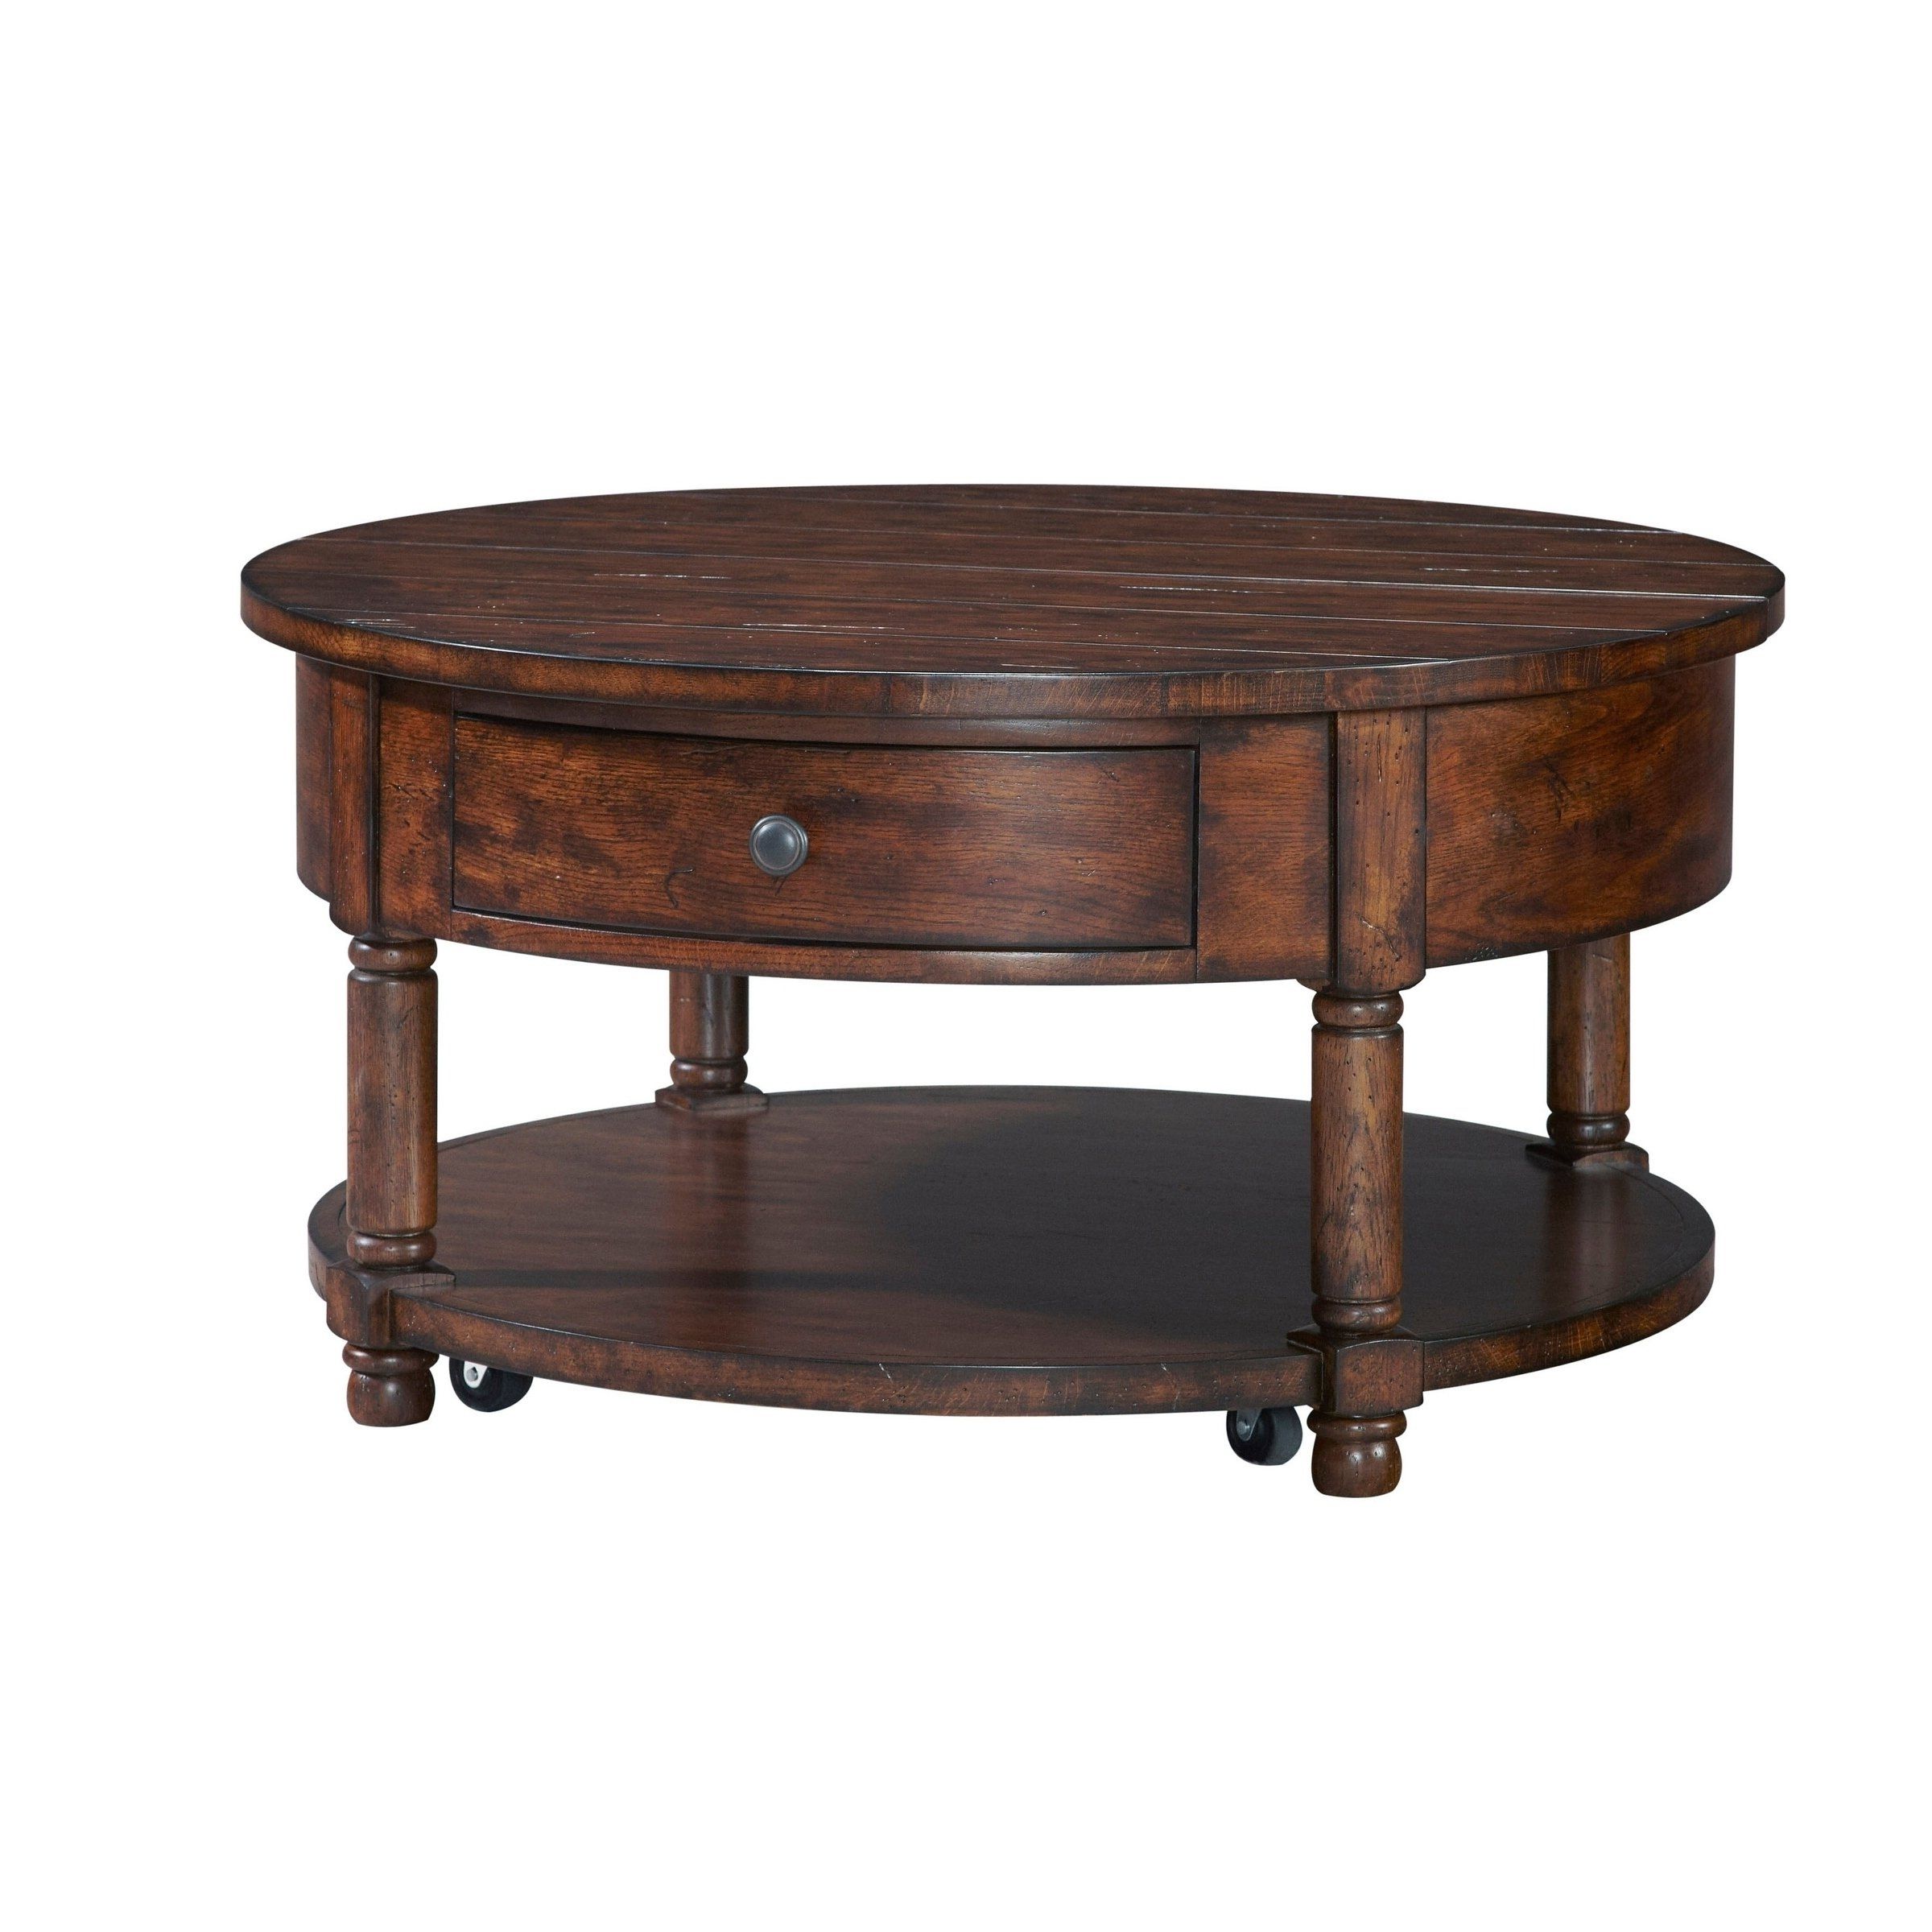 Shop Broyhill Attic Rustic Oak Round Lift Top Cocktail Table – Free Throughout Well Known Jasper Lift Top Cocktail Tables (View 7 of 20)